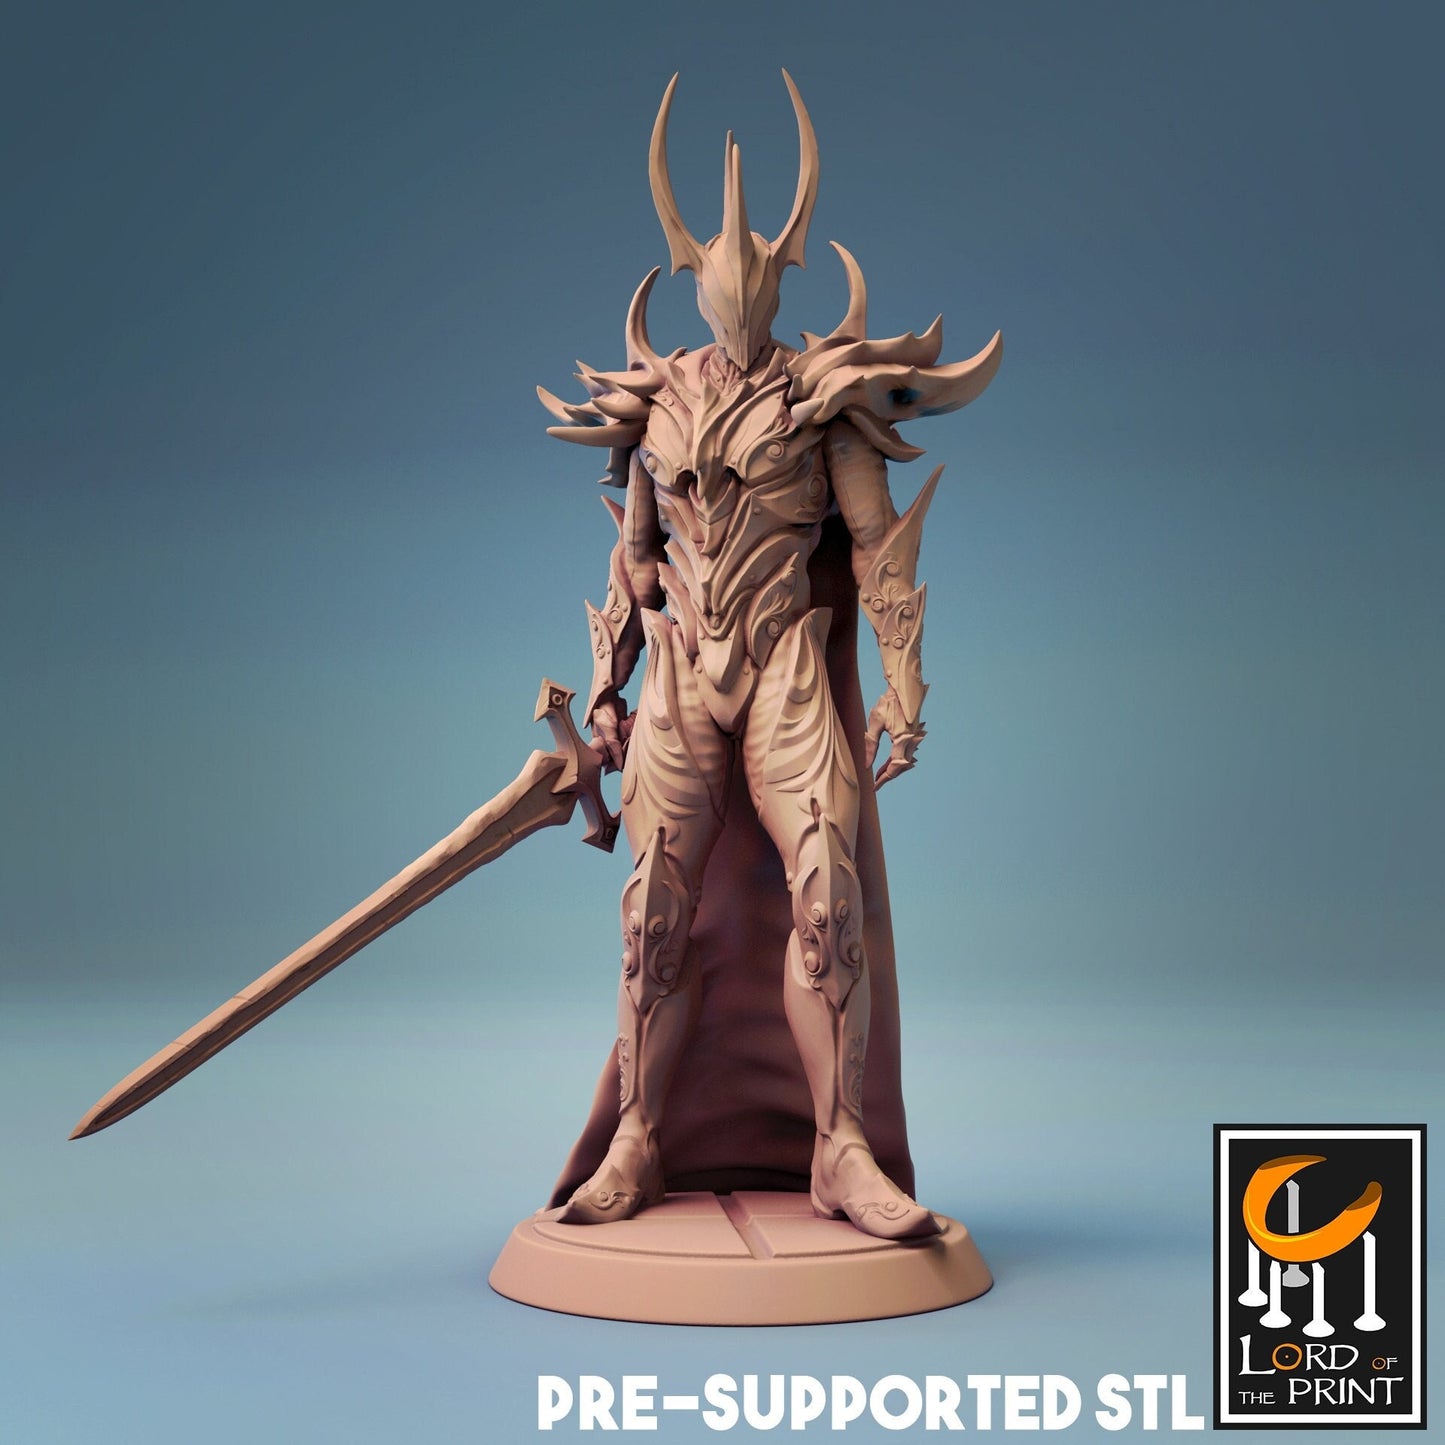 Male Human Fighter D&D miniature, by Lord of the Print // 3D Print on Demand / DnD / Pathfinder / RPG